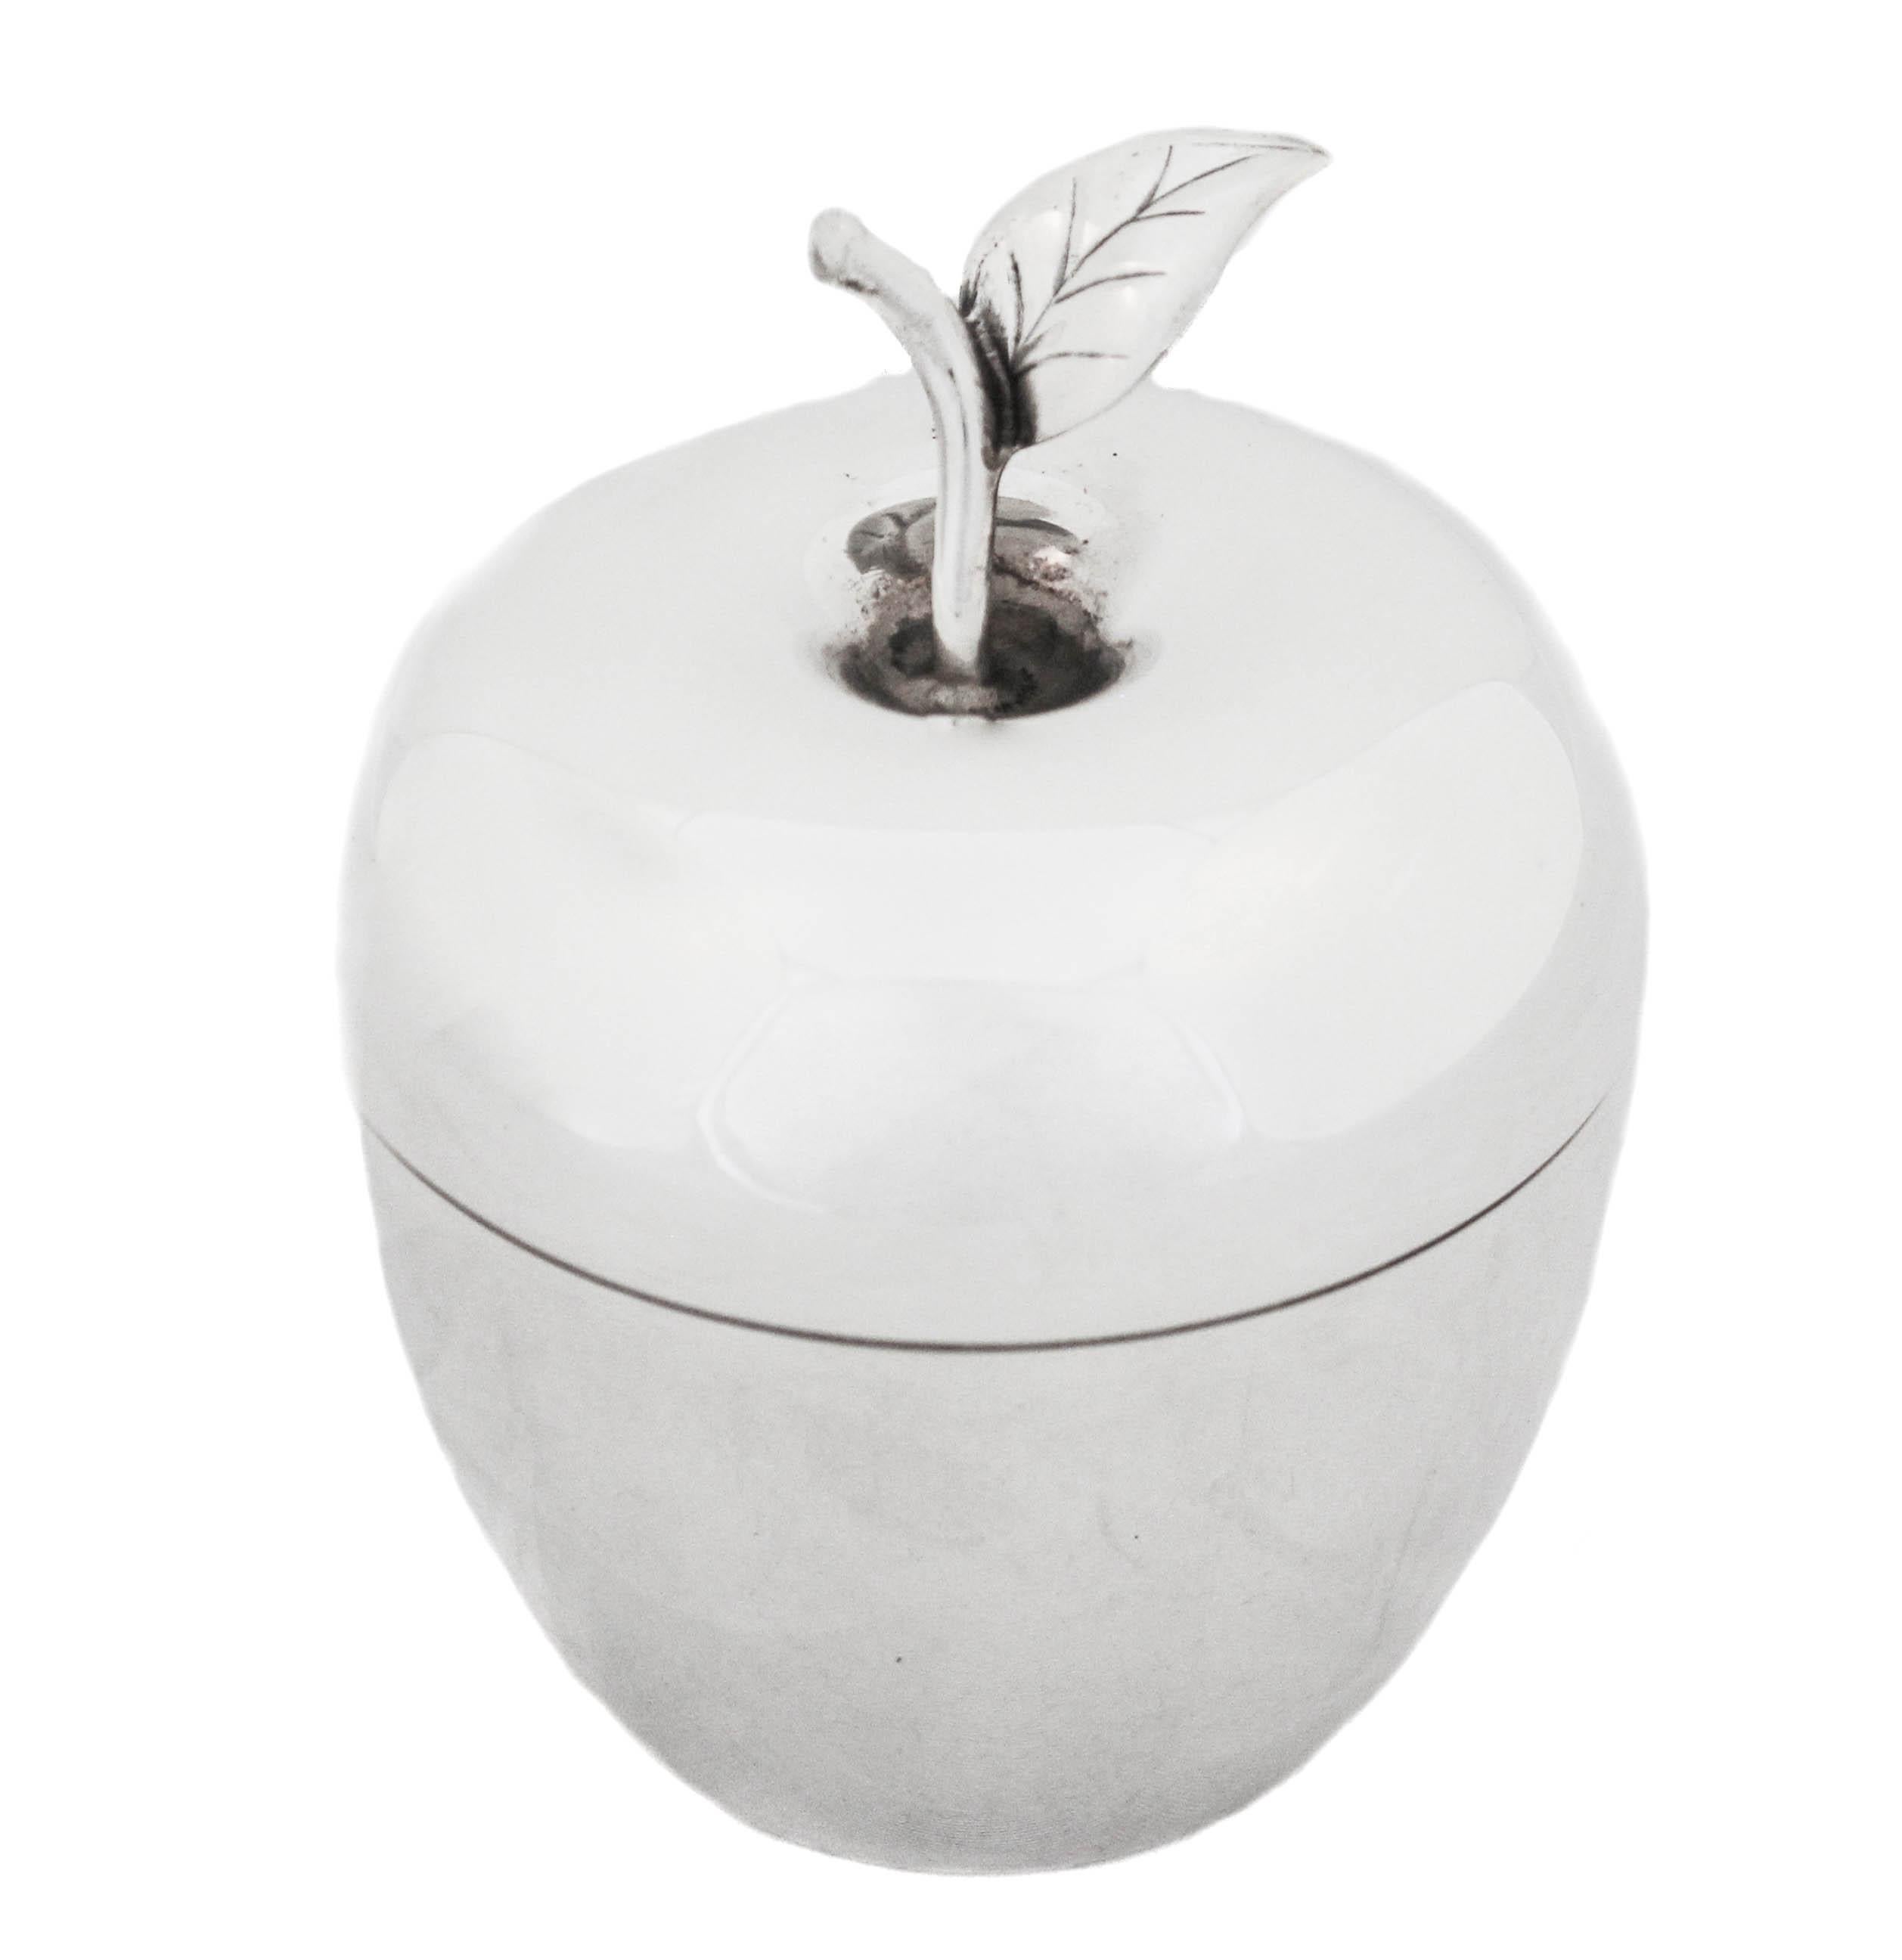 We are delighted to offer you this sterling silver apple jar by the world renowned Tiffany & Company. Shaped like an actual apple with a core and leaf, it opens and can hold jam, honey or any other condiments. We had a glass liner custom made that